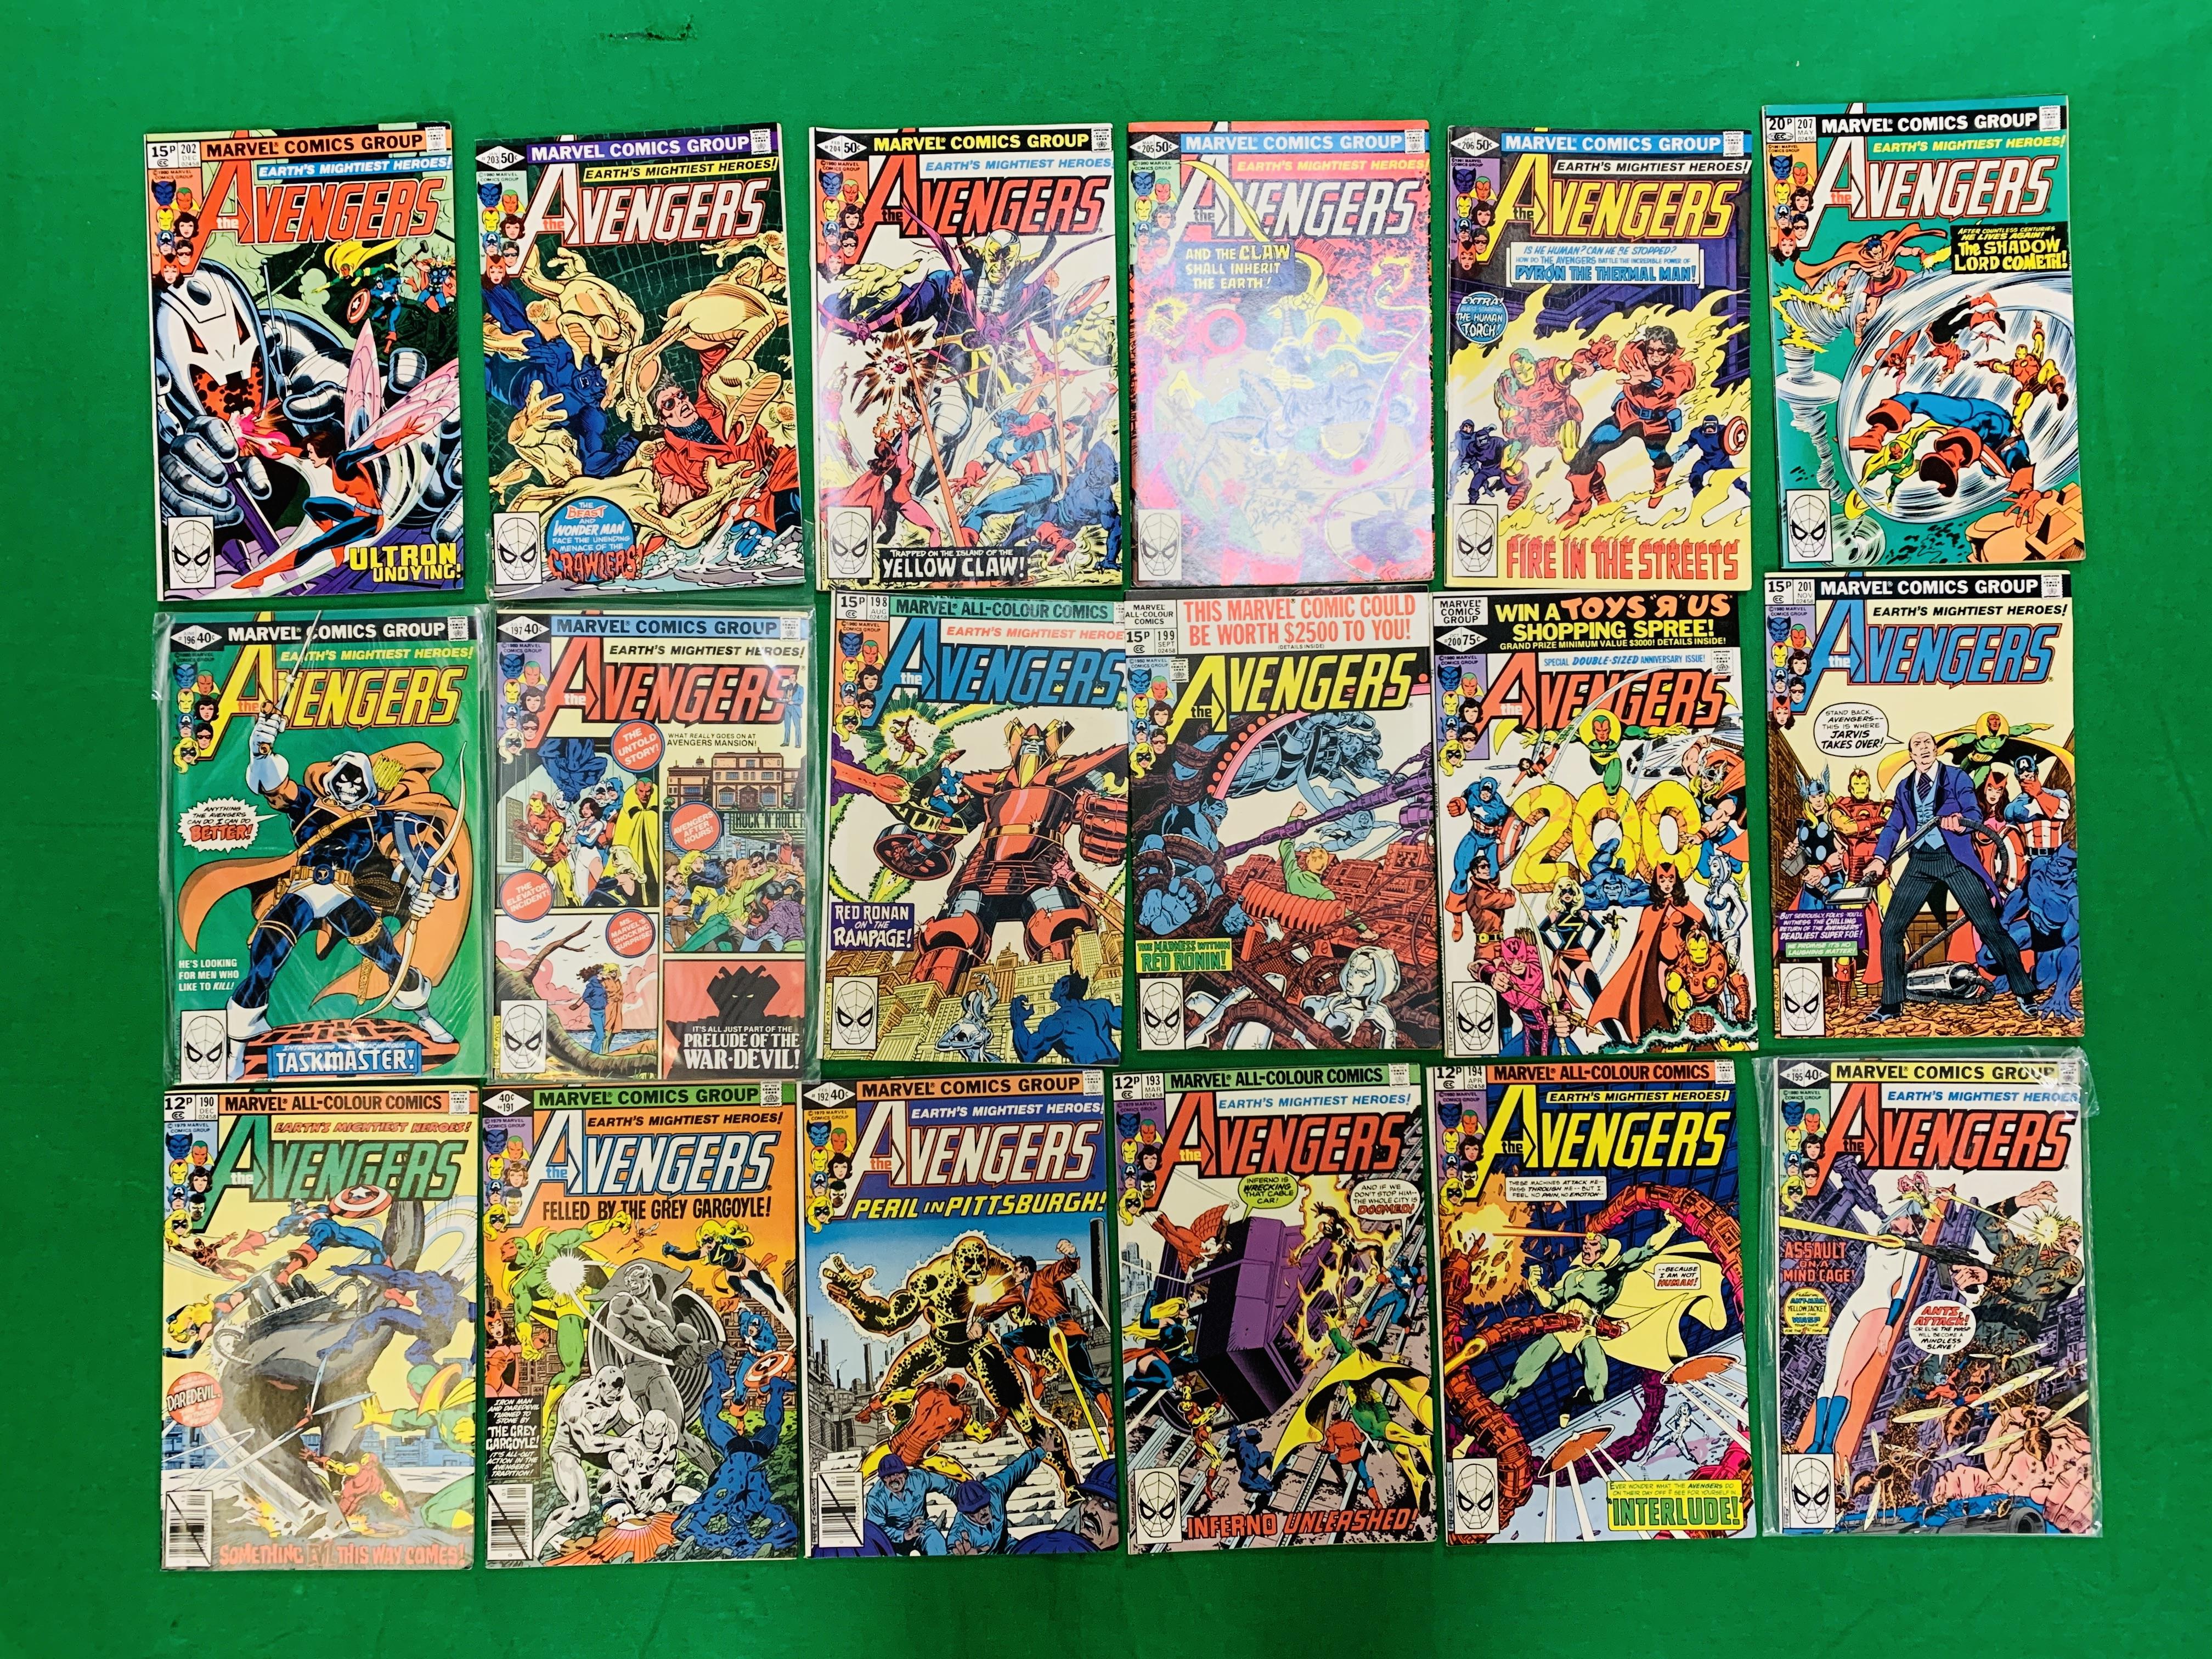 MARVEL COMICS THE AVENGERS NO. 101 - 299, MISSING ISSUES 103 AND 110. - Image 67 of 130